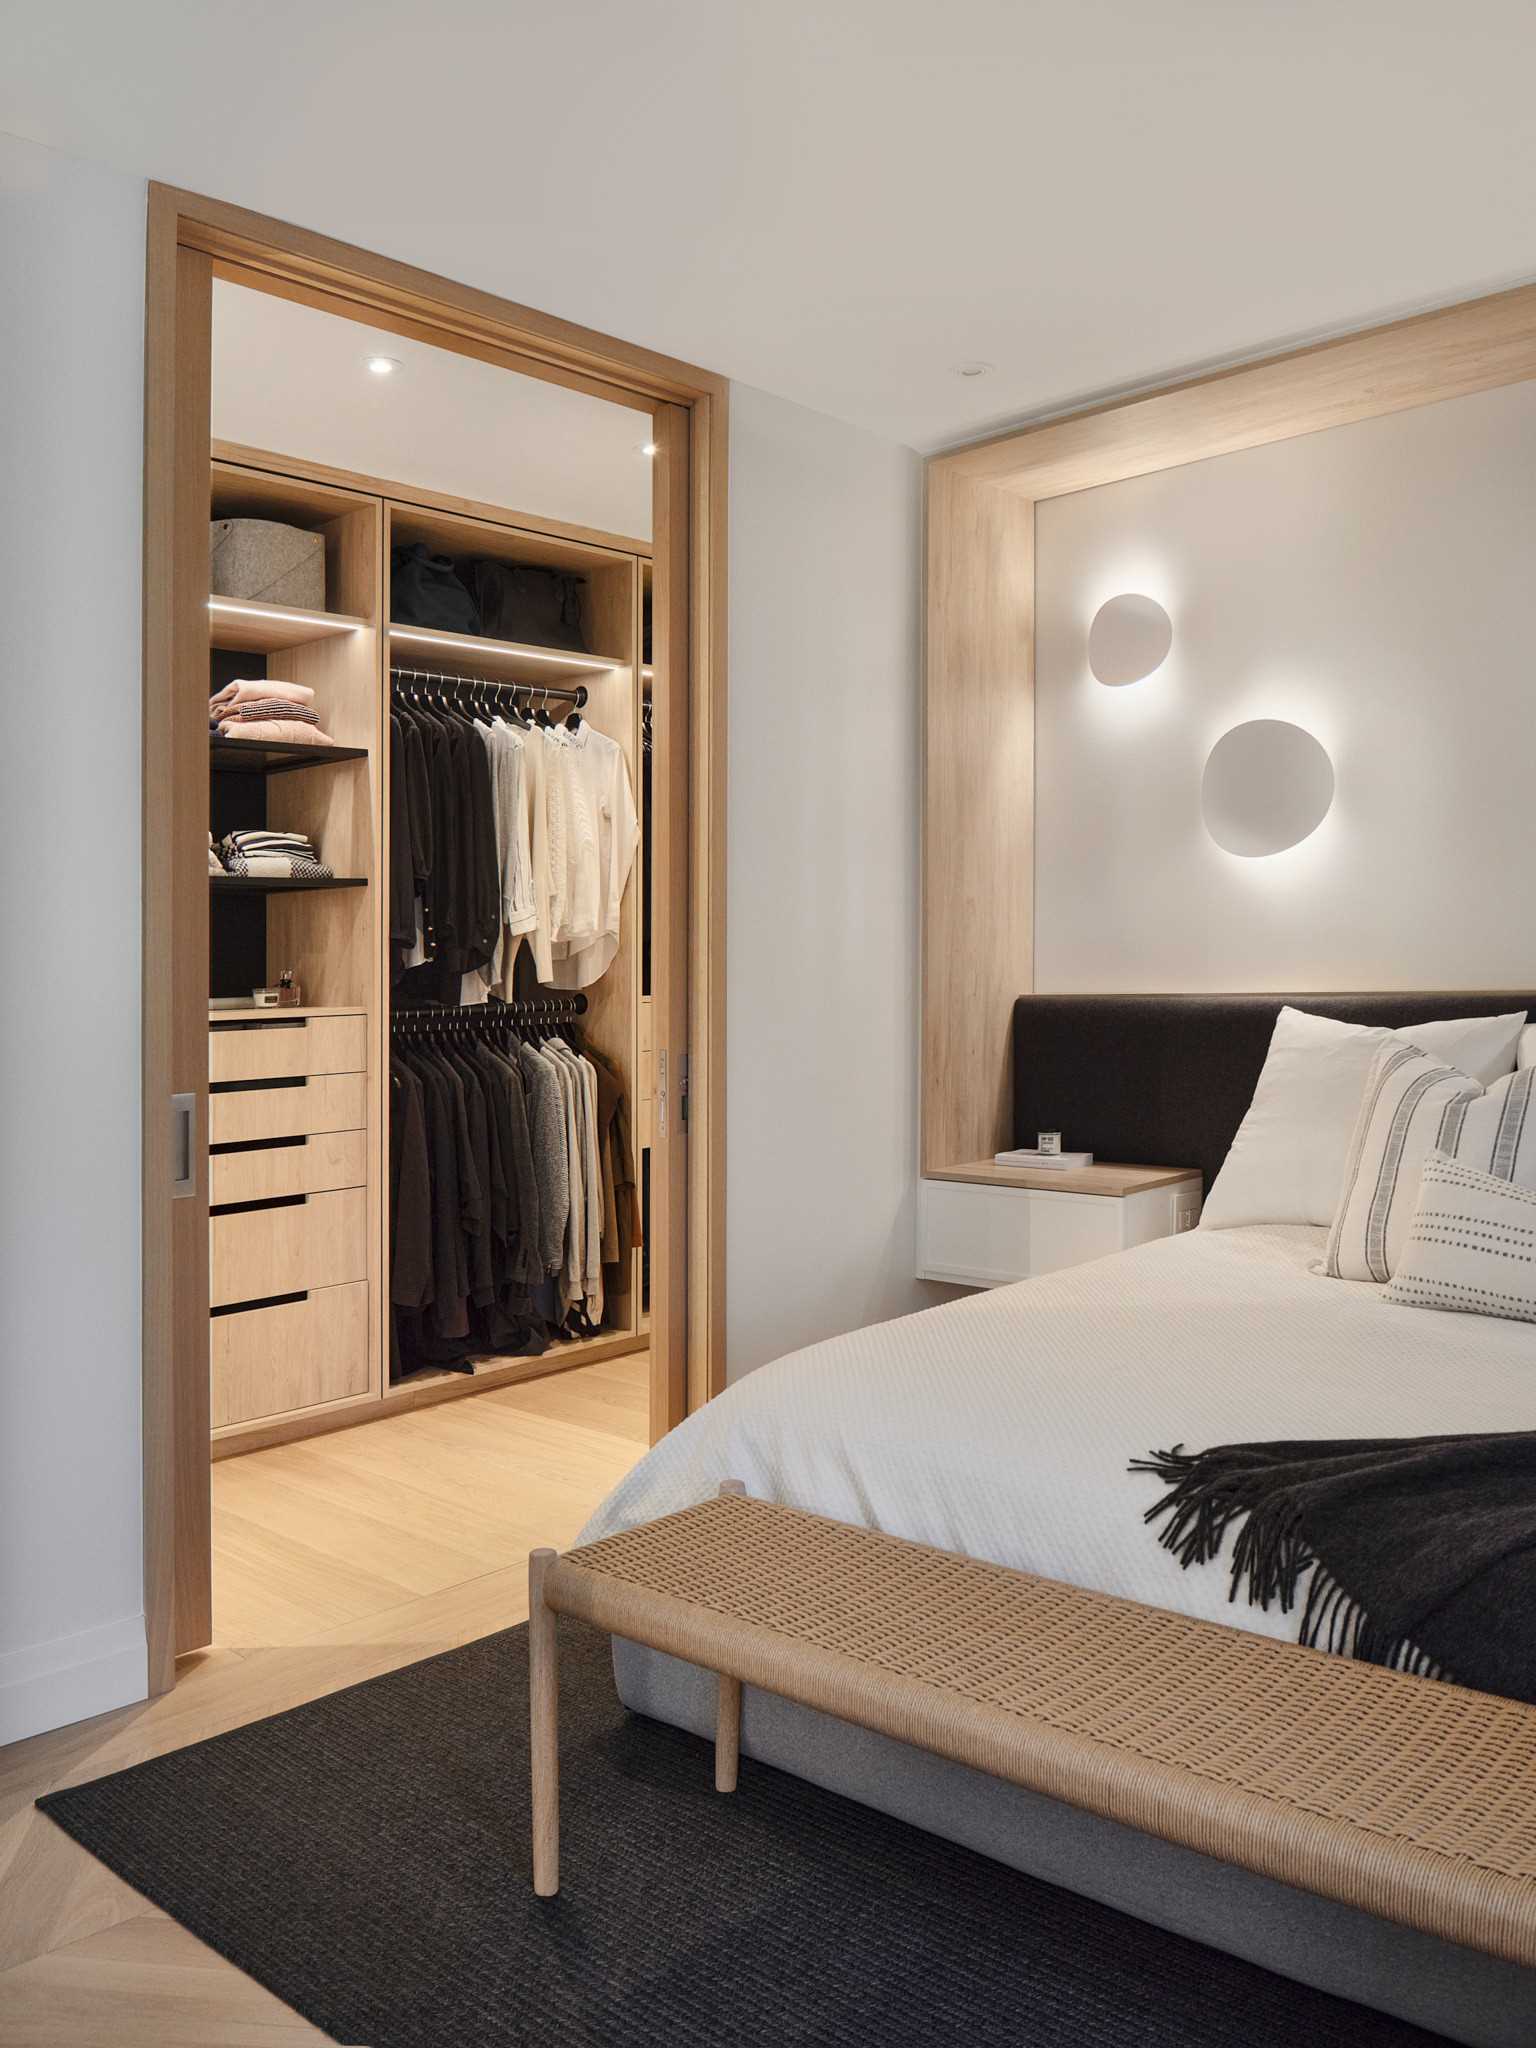 In this primary bedroom, there's a wood detail that wraps around the bed and ends at the bedside tables, while sliding doors open to reveal a custom-designed walk-in closet.